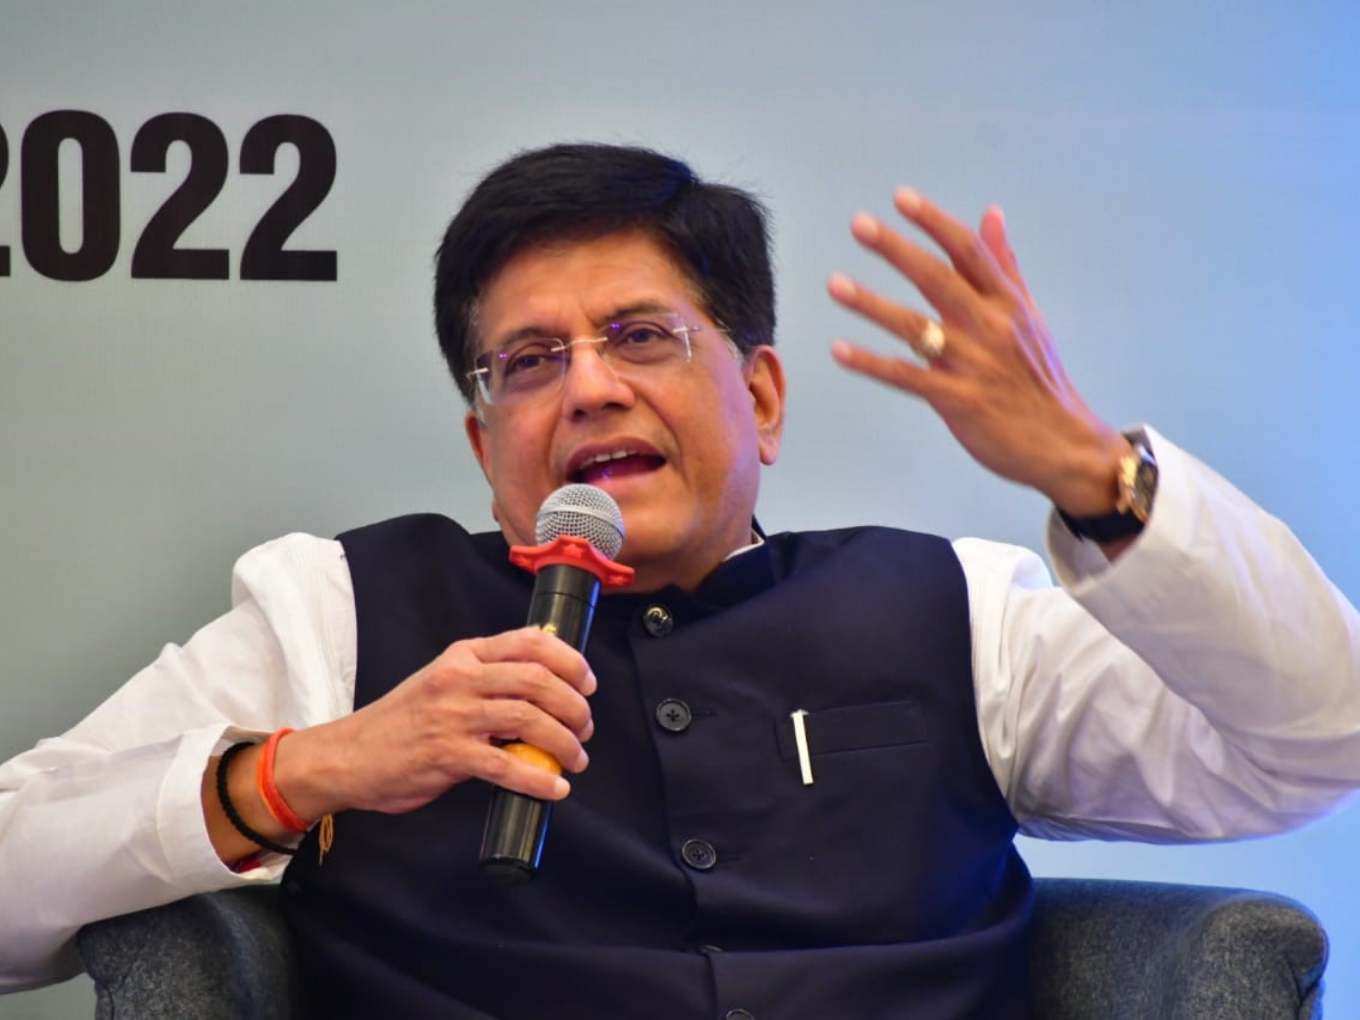 Incorporate Startups In India, Don’t Move To Tax Havens: Piyush Goyal